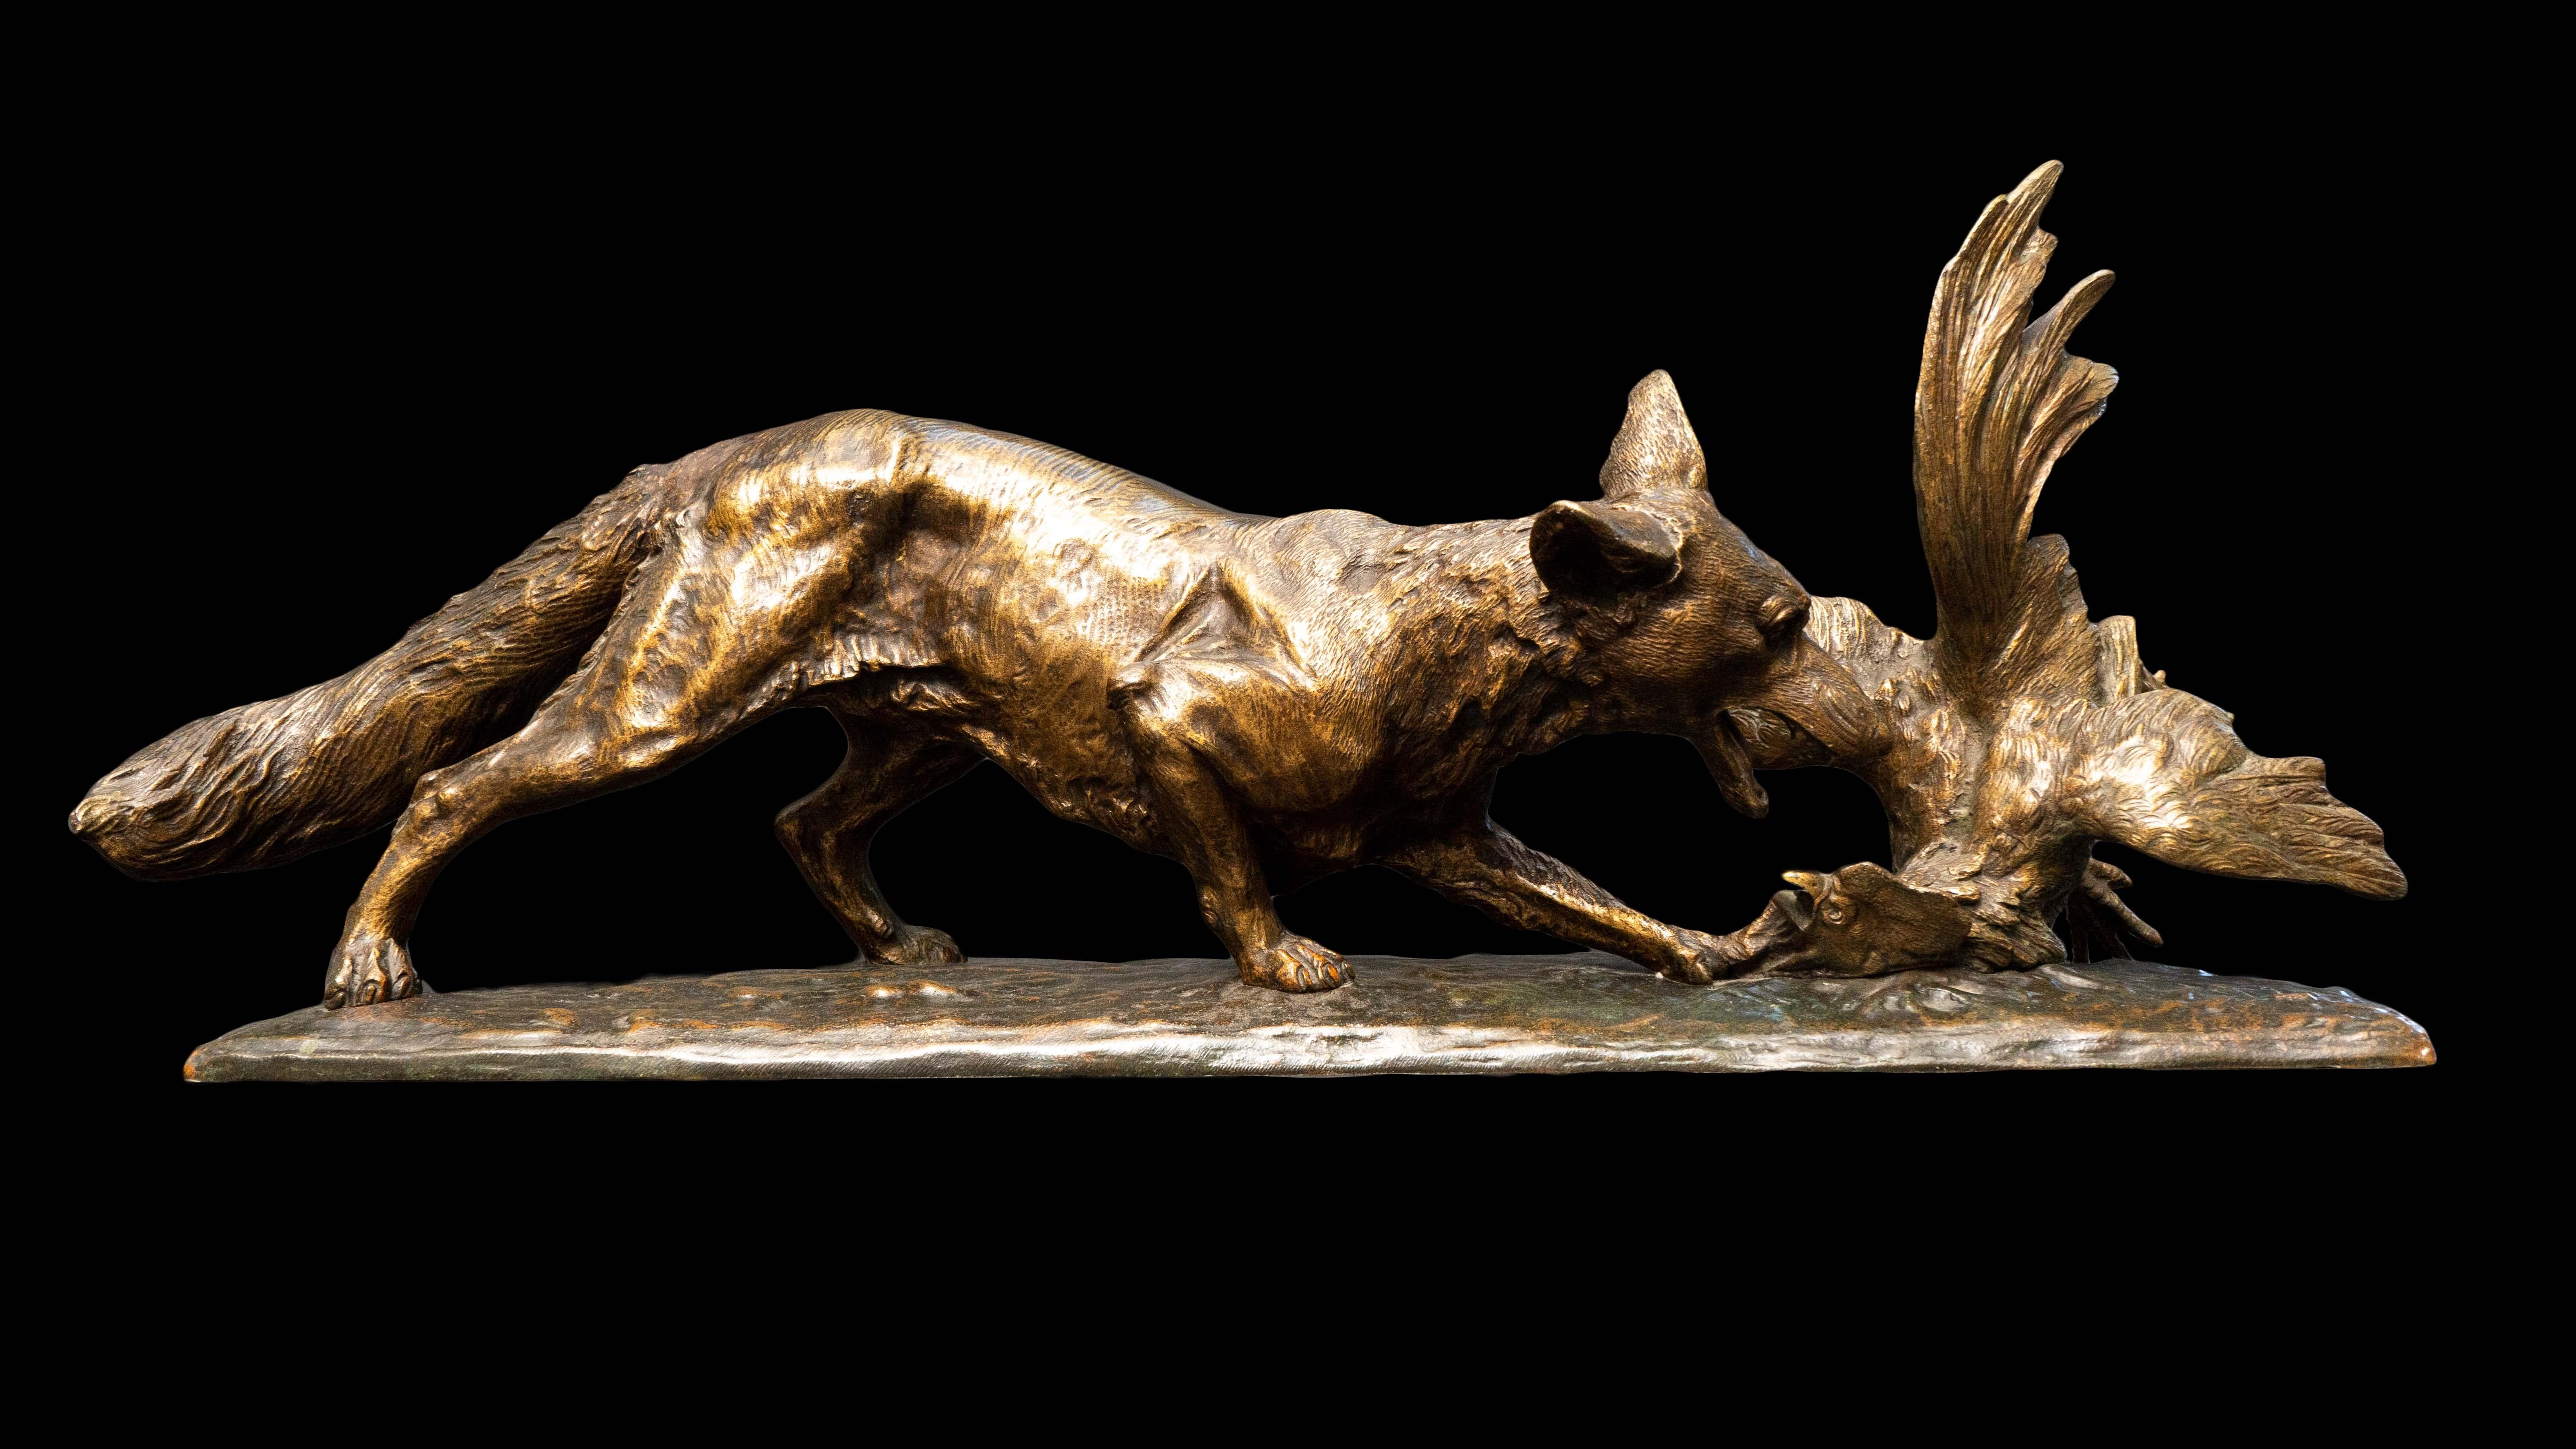 Late 19th century bronze sculpture of a fox and chicken by Edward Drouot (1859-1945):

Édouard Drouot was a French artist best known for his marble and bronze sculptures of mythological and allegorical scenes. At times creating animalier and